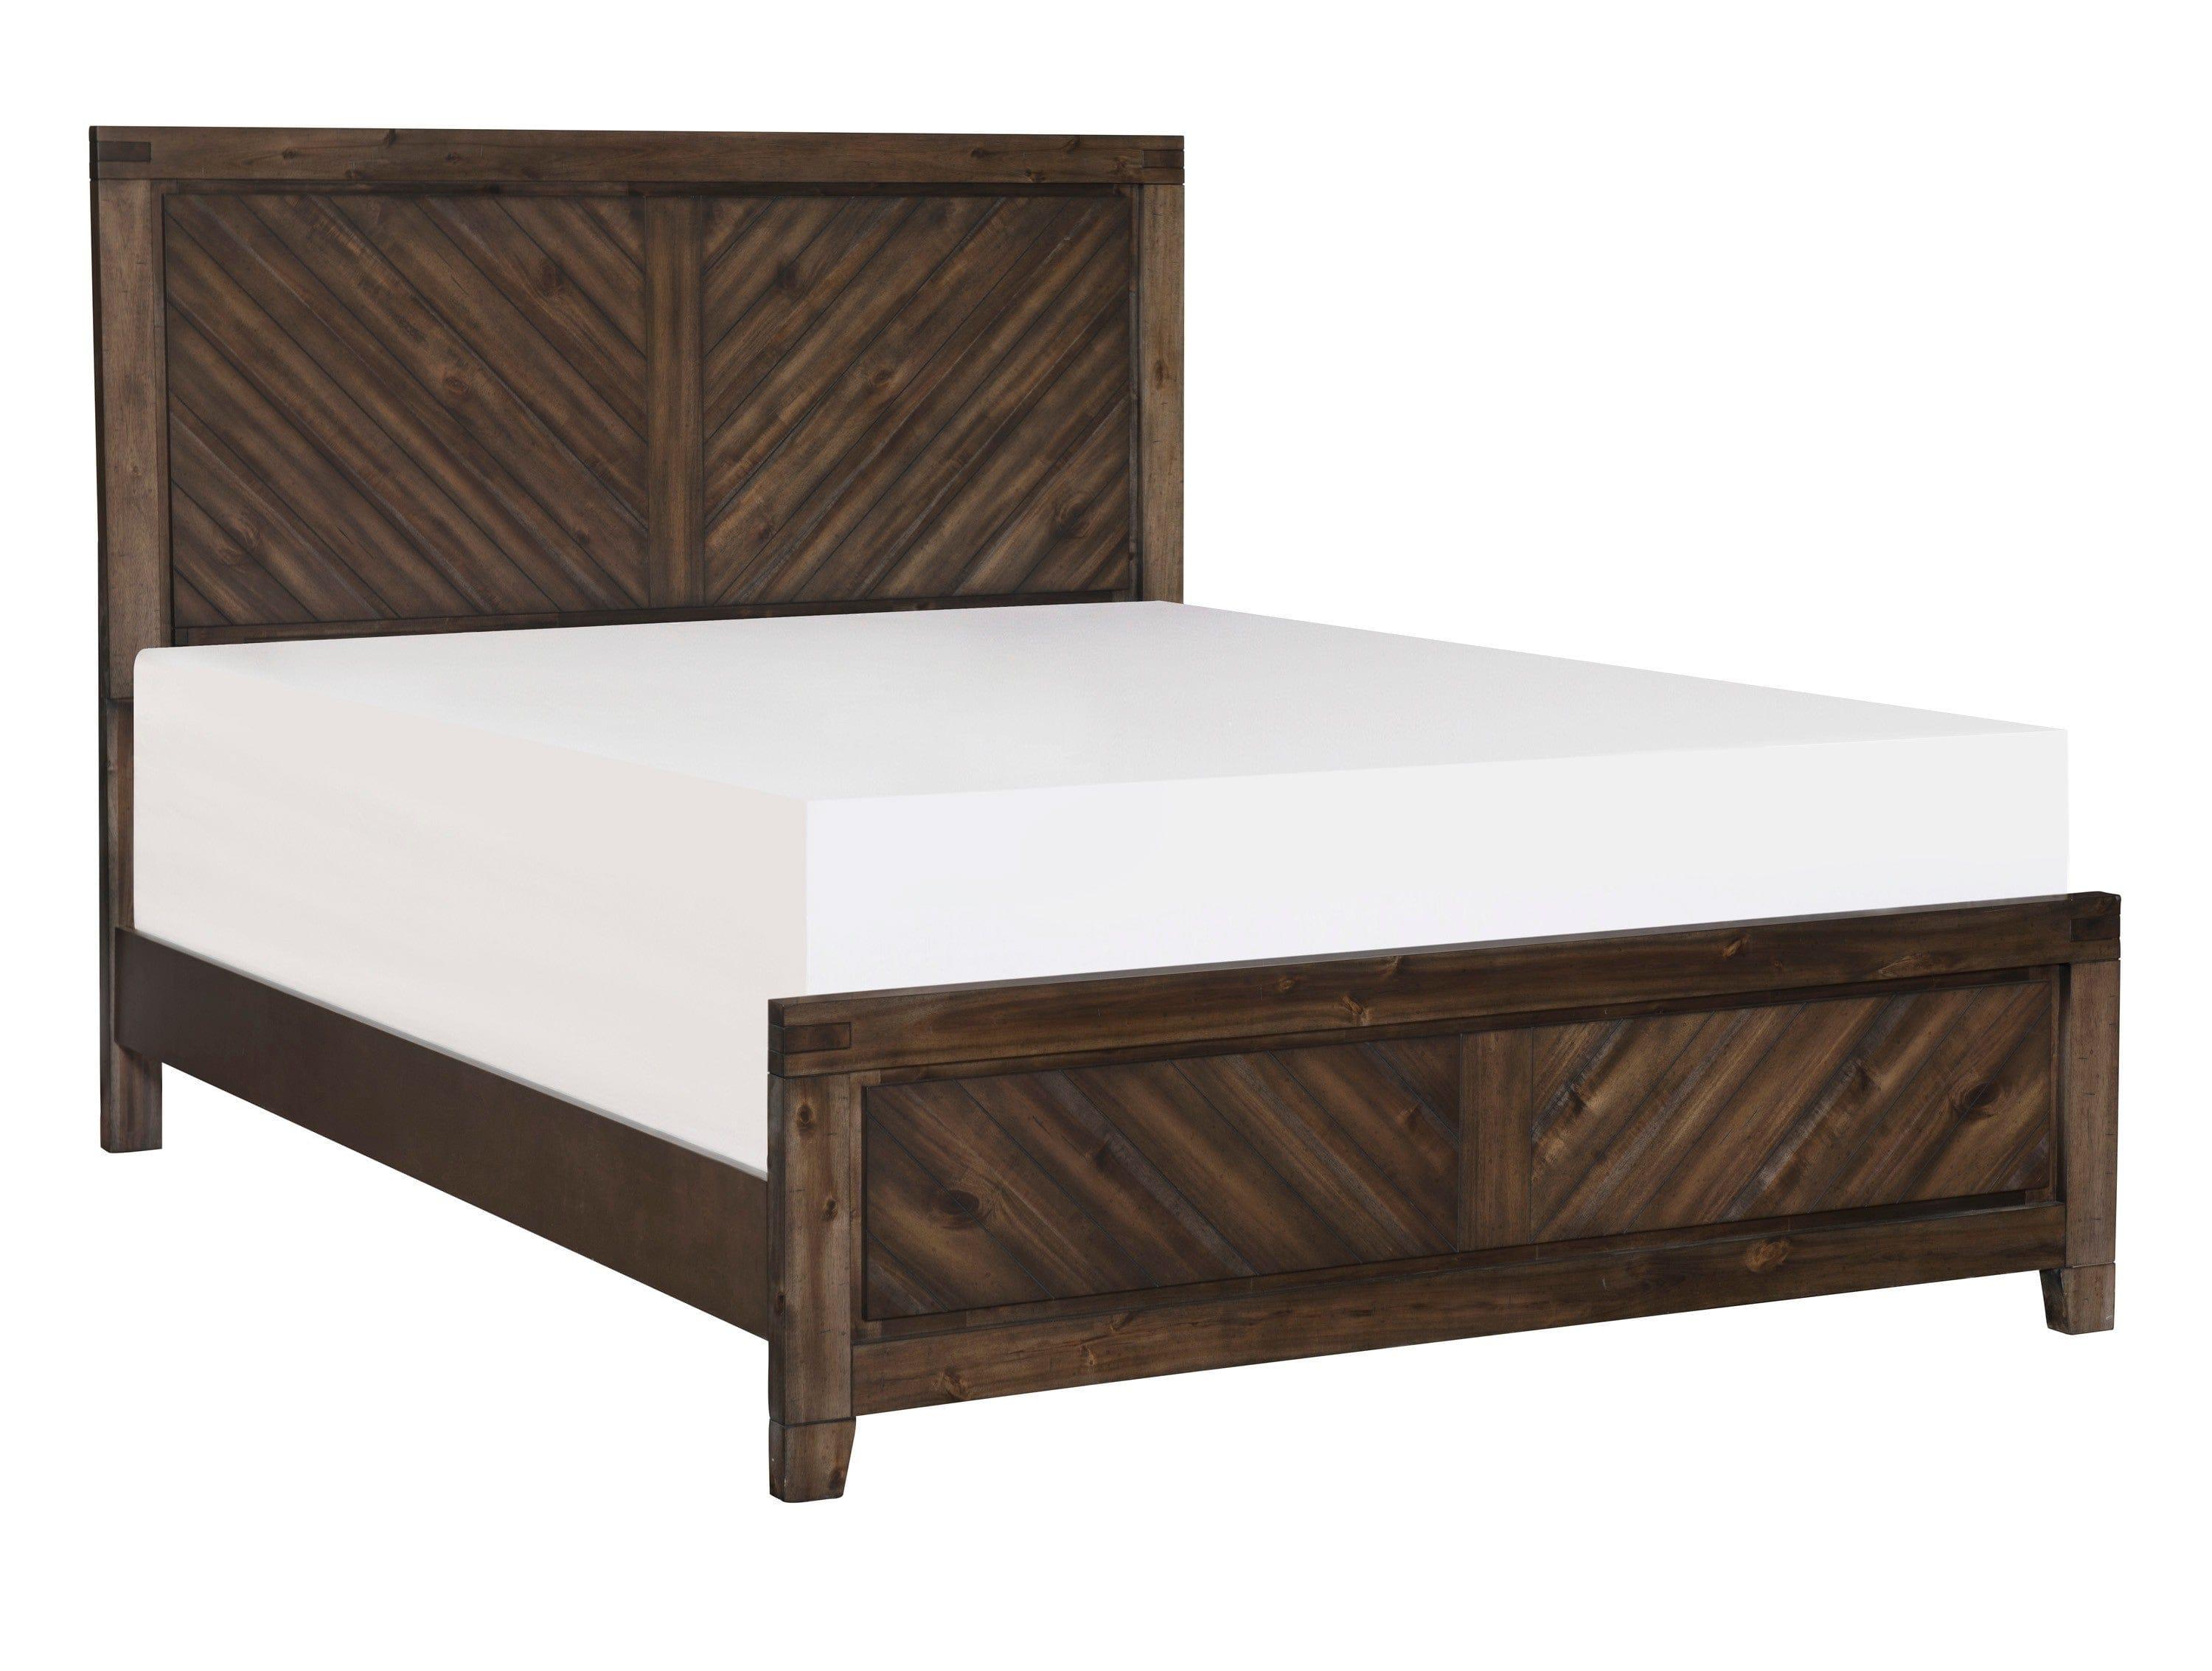 Shop Modern-Rustic Design 1pc Eastern King Size Bed Distressed Espresso Finish Plank Style Detailing Bedroom Furniture Wooden Bed Mademoiselle Home Decor